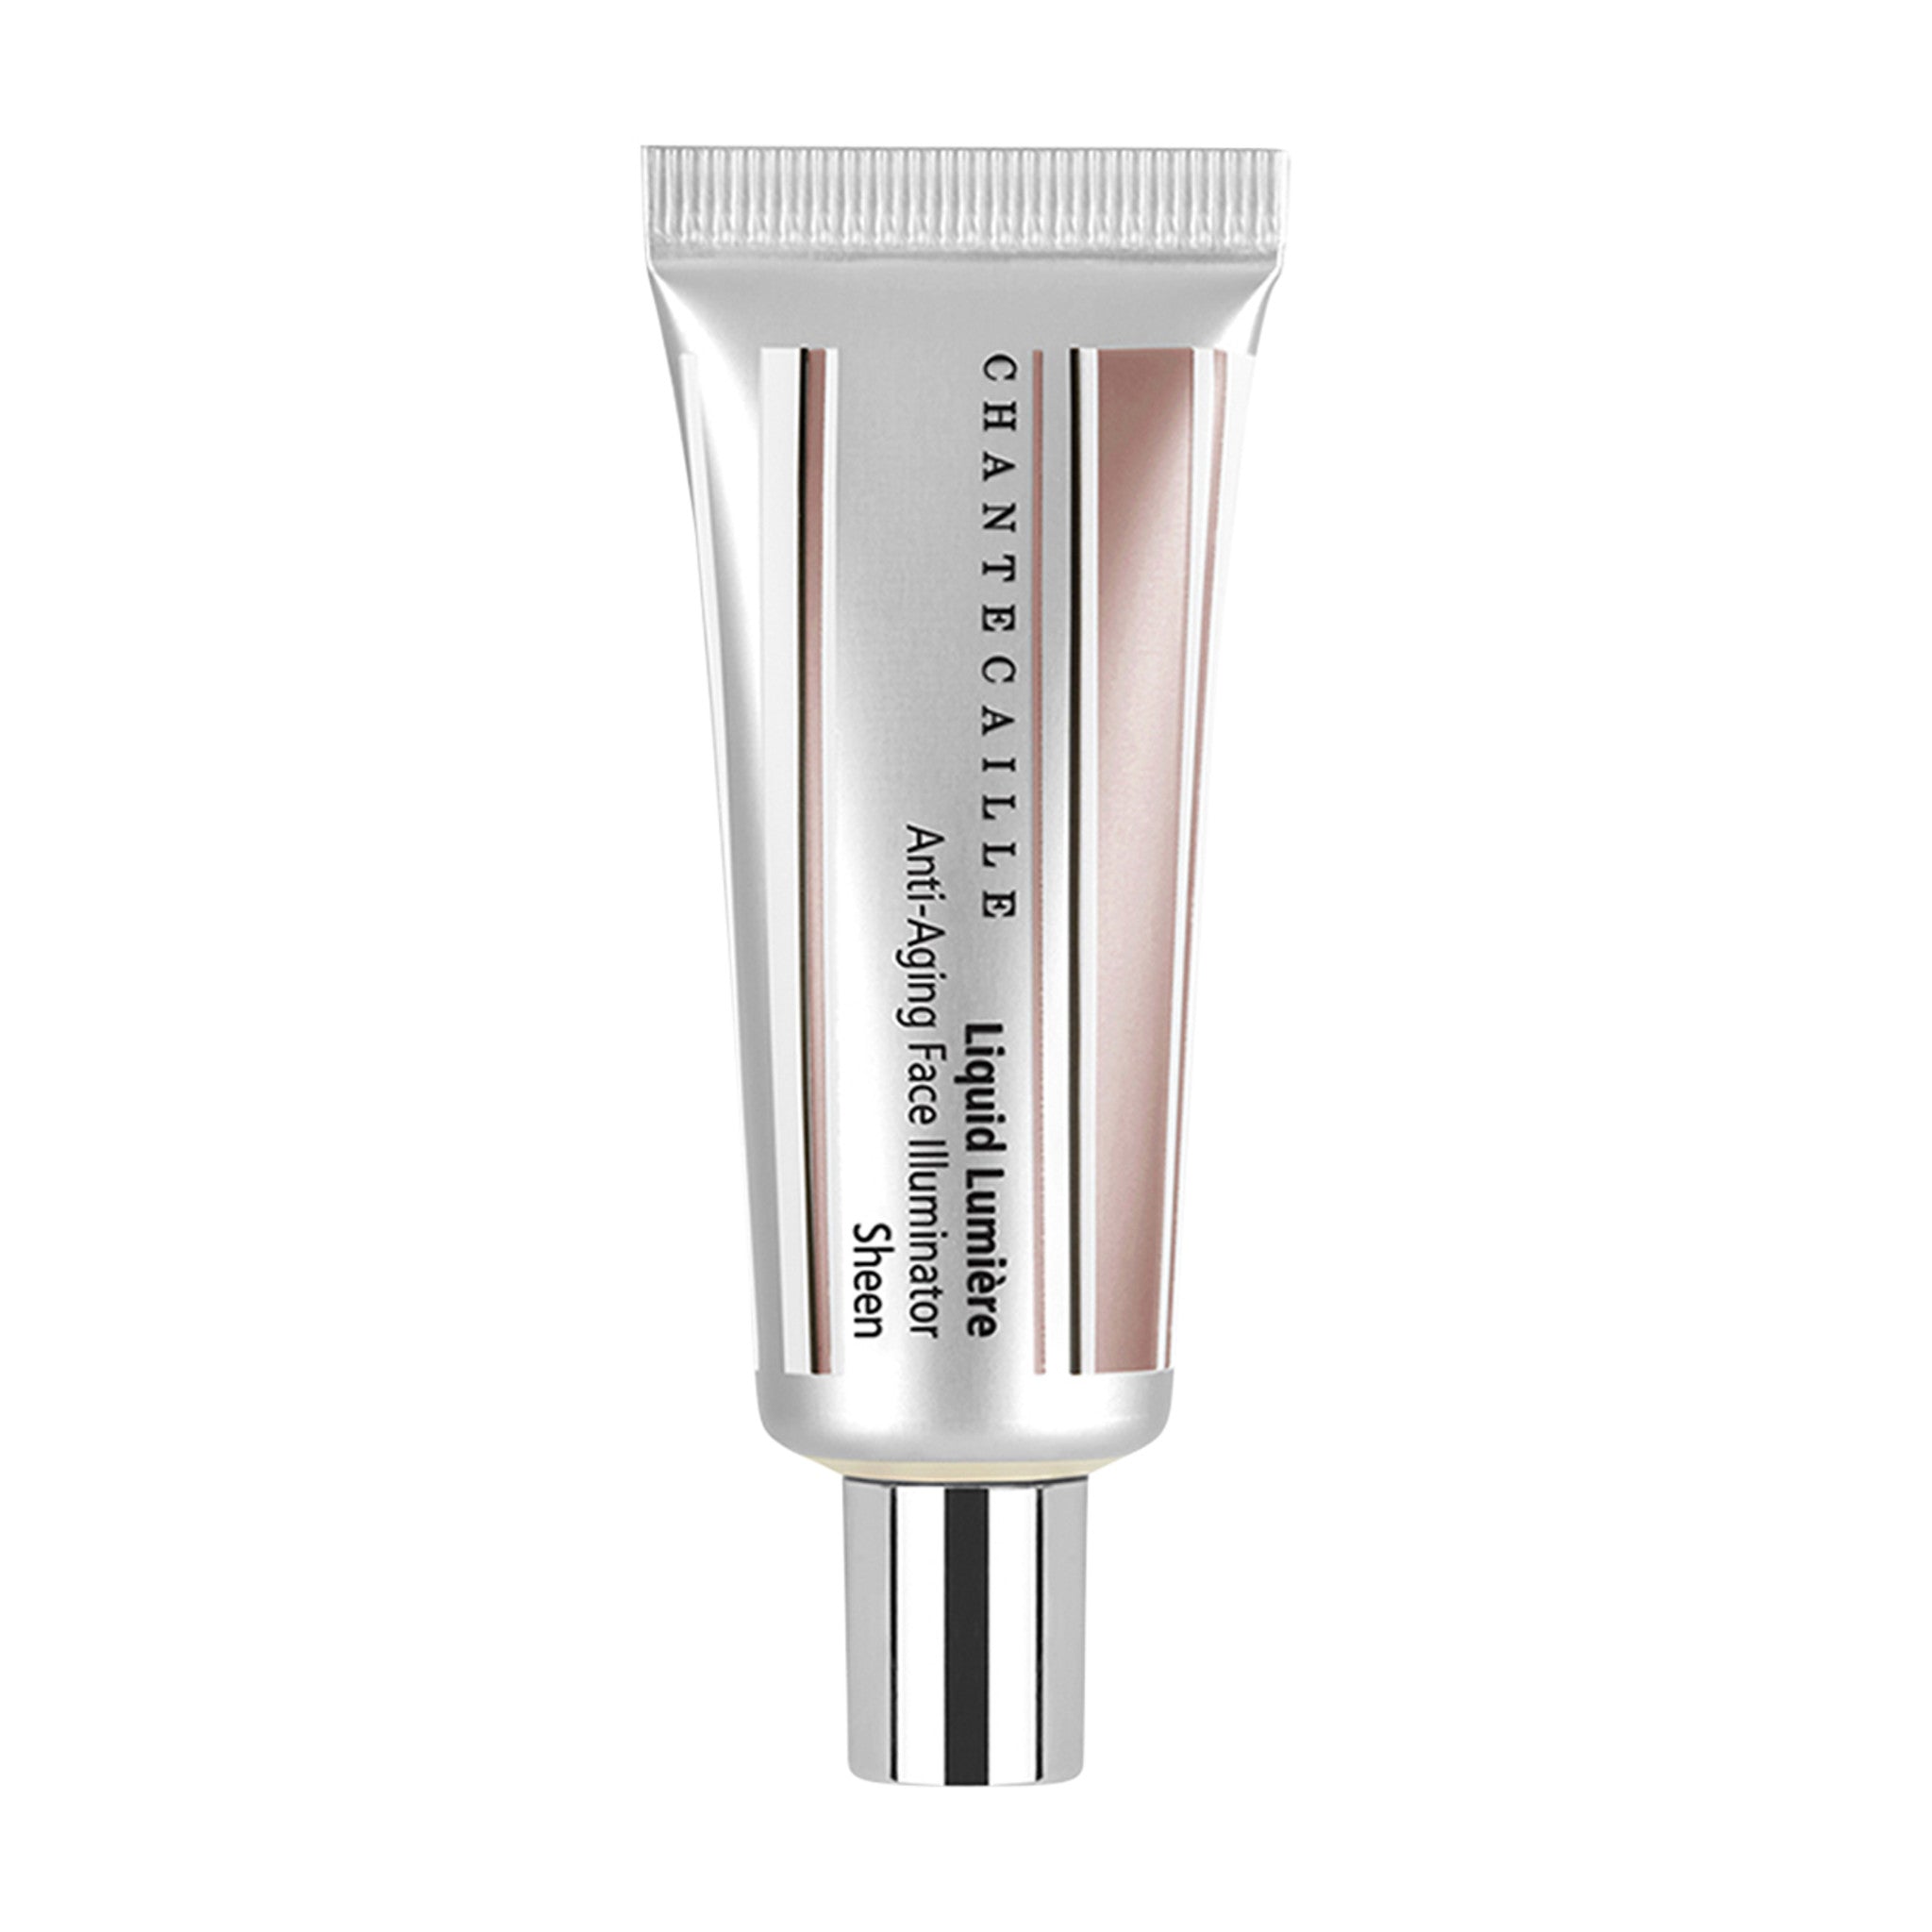 Chantecaille Liquid Lumière Anti-Aging Face Illuminator Color/Shade variant: Sheen main image. This product is in the color nude